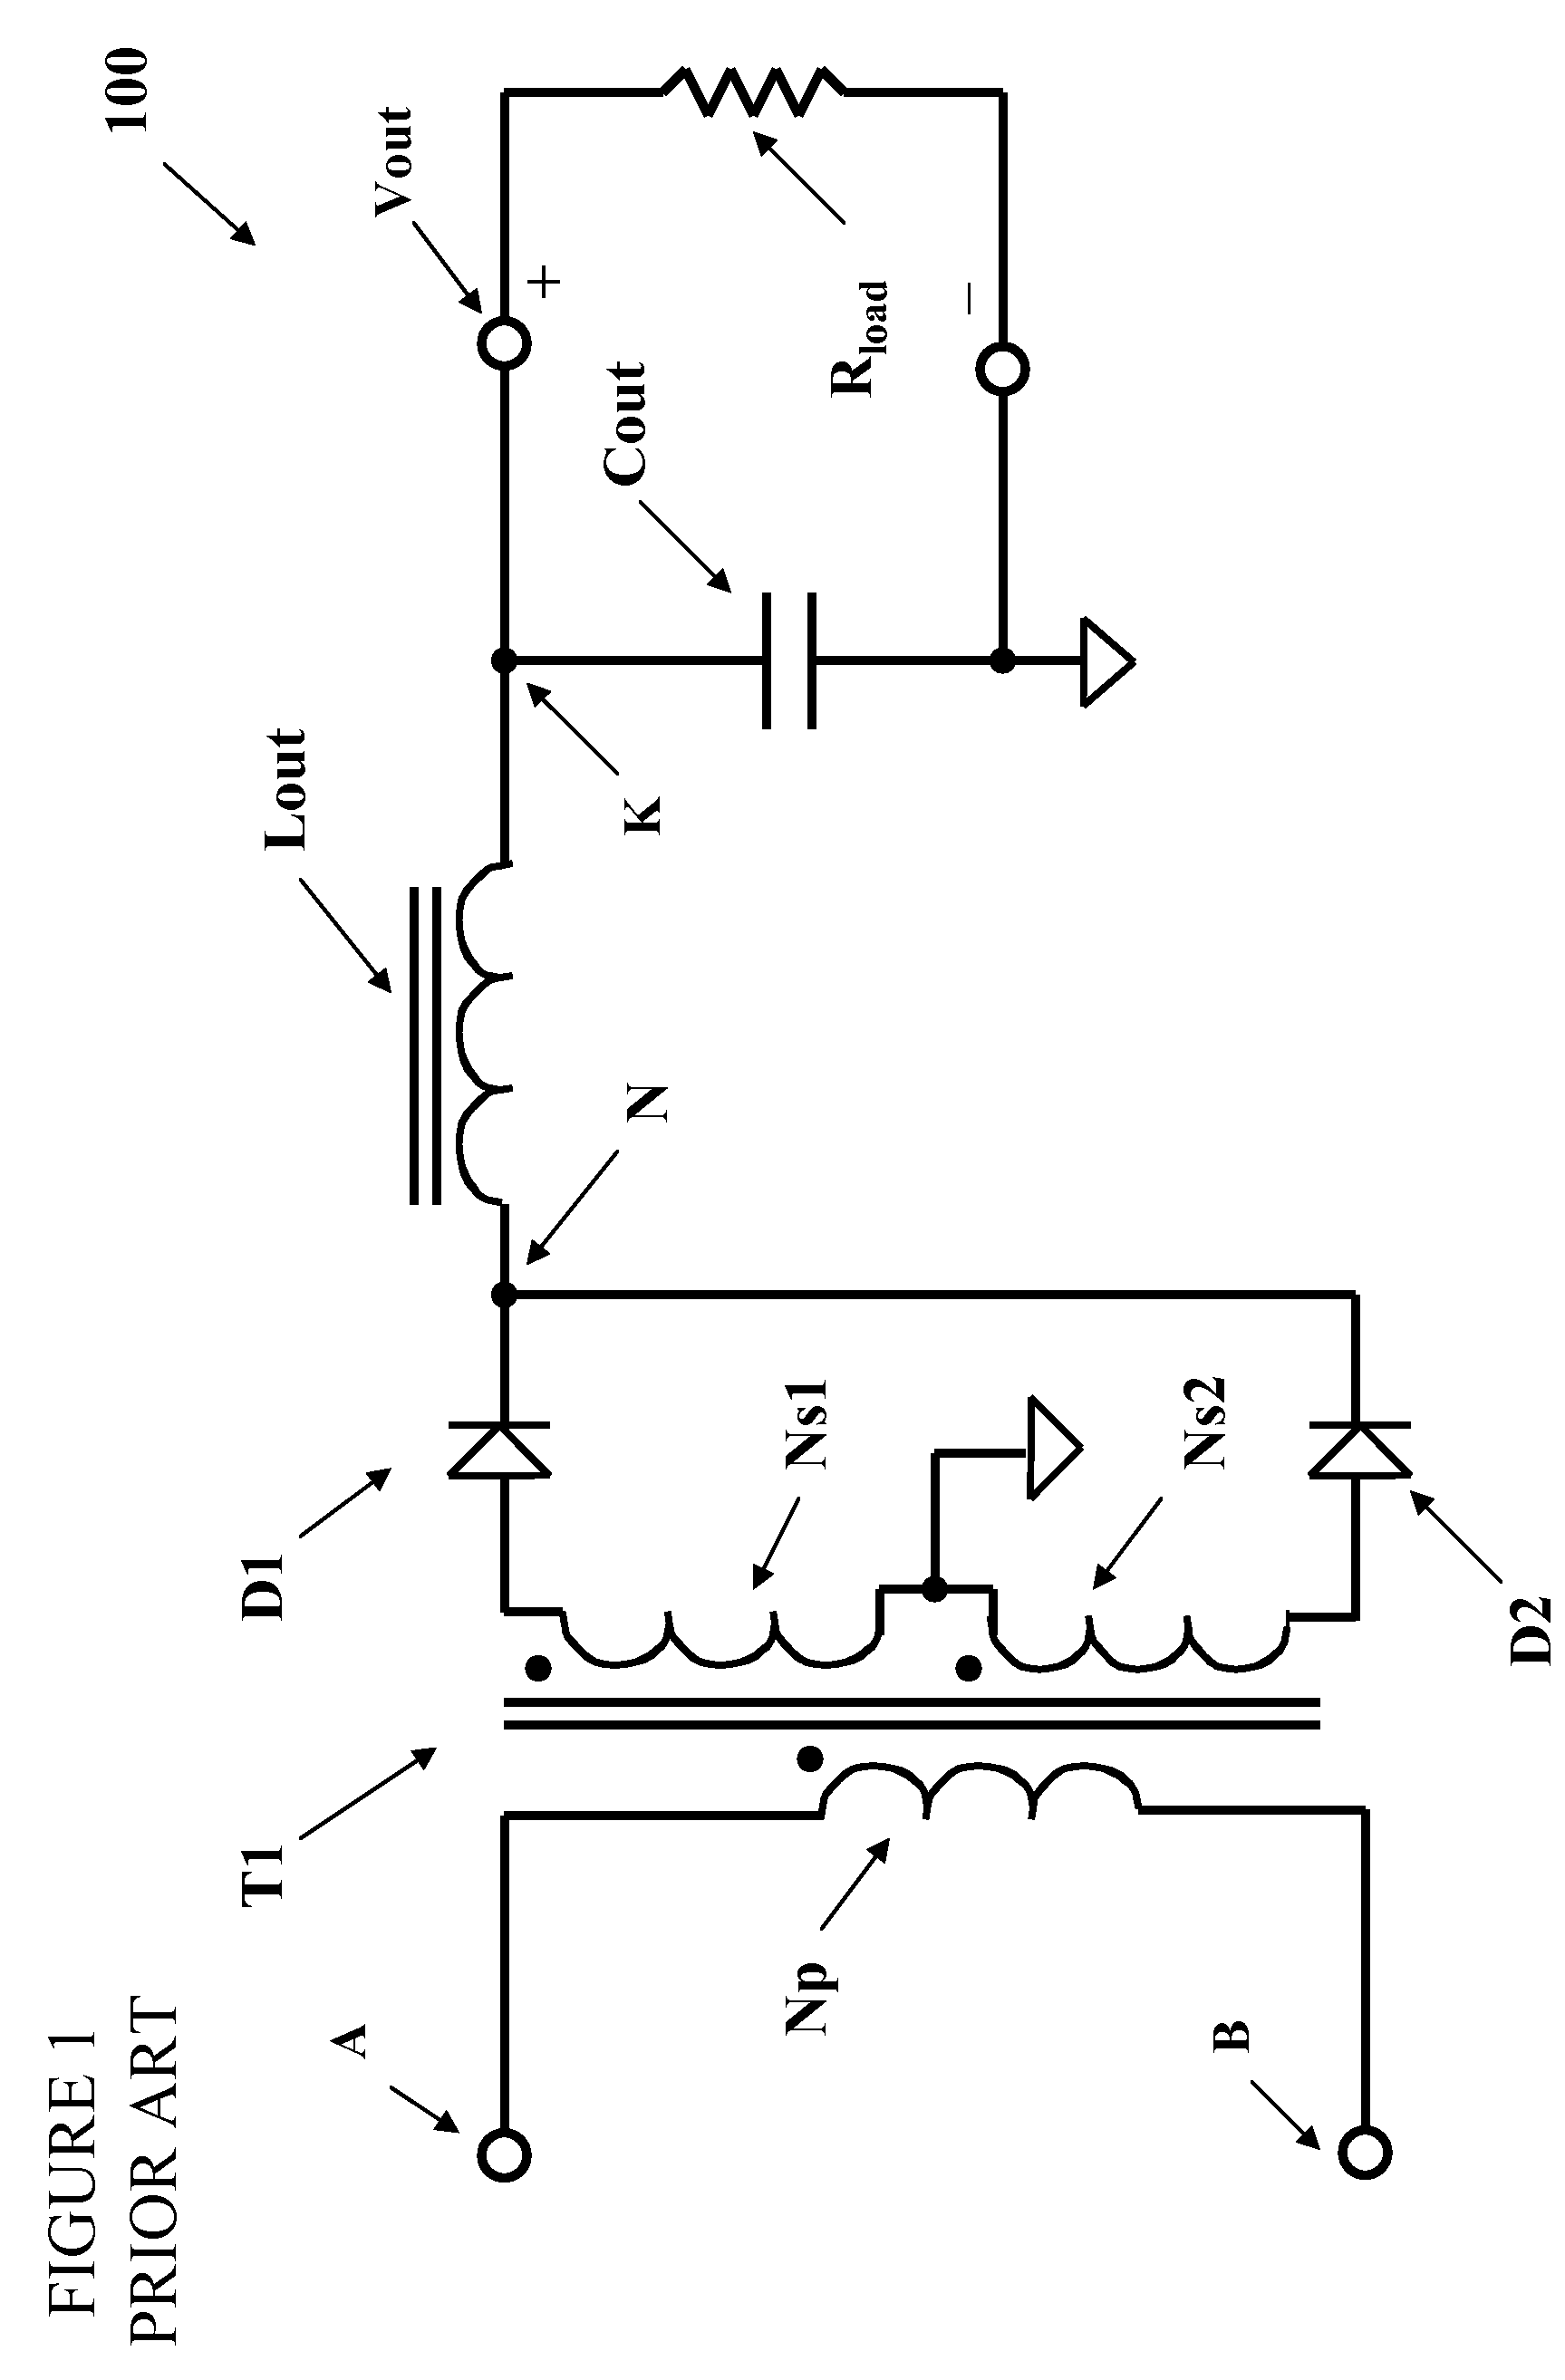 Ripple reduction for switch-mode power conversion